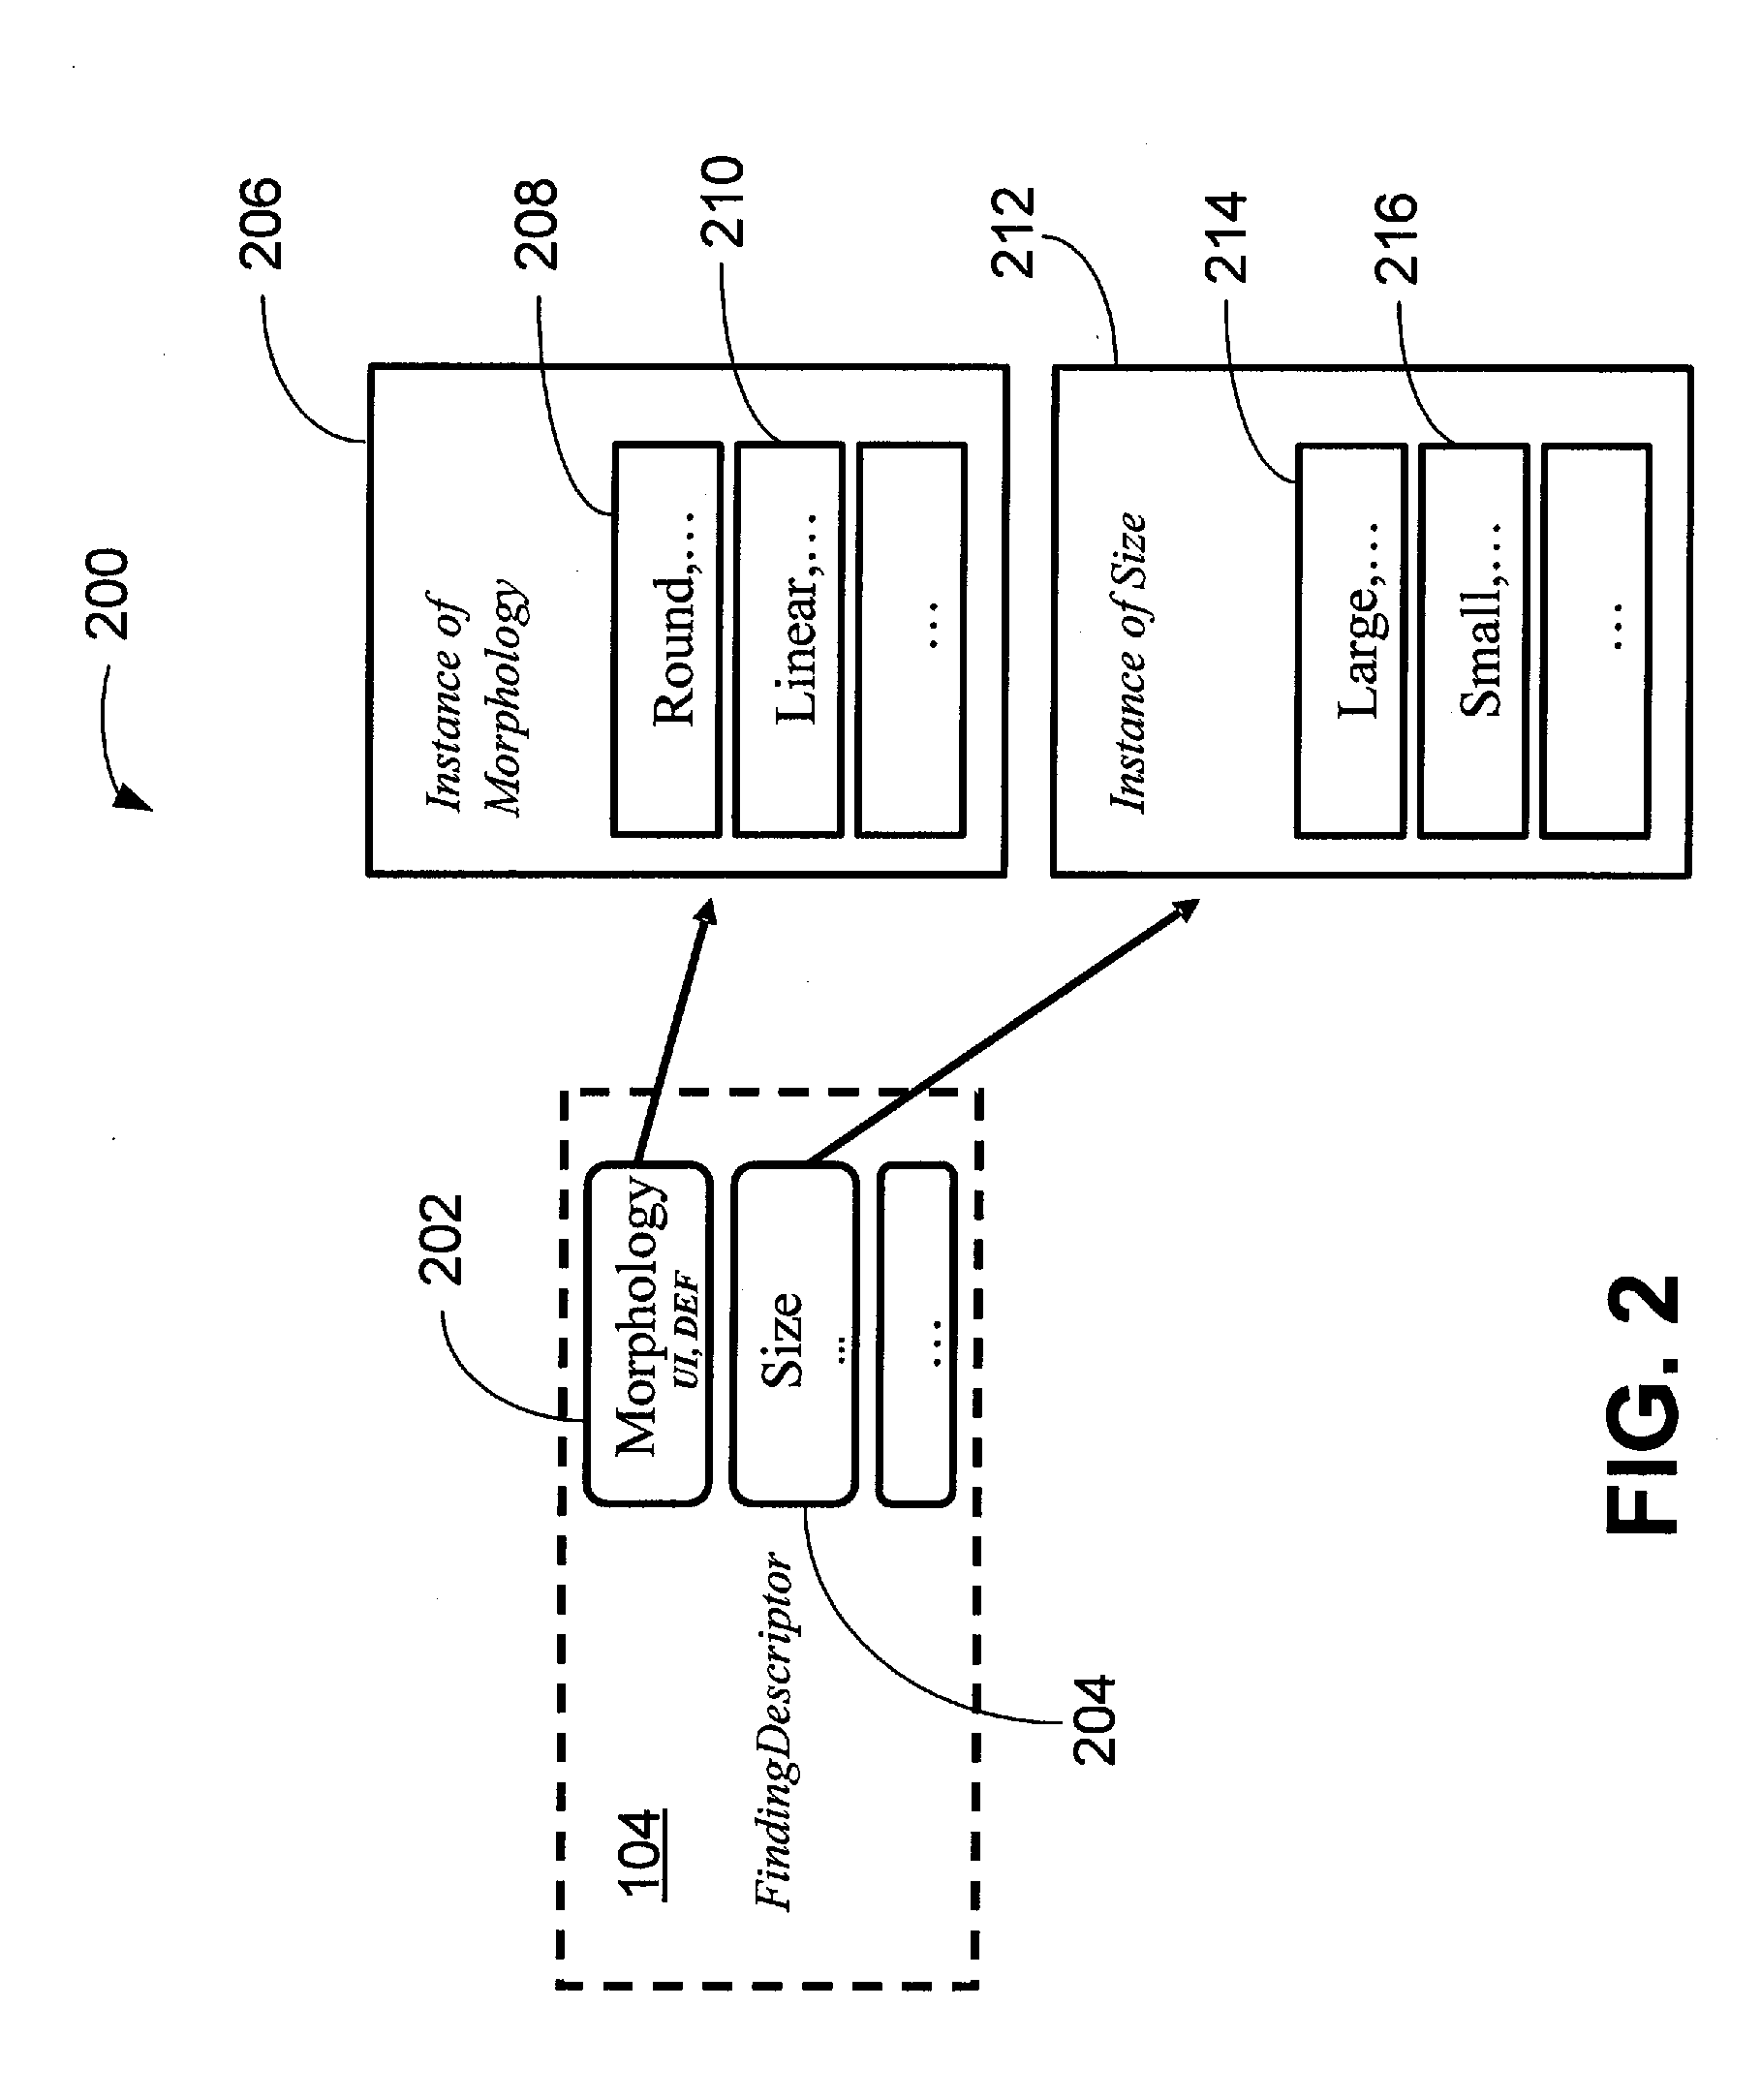 System and Method for Generating Knowledge Based Radiological Report Information Via Ontology Driven Graphical User Interface